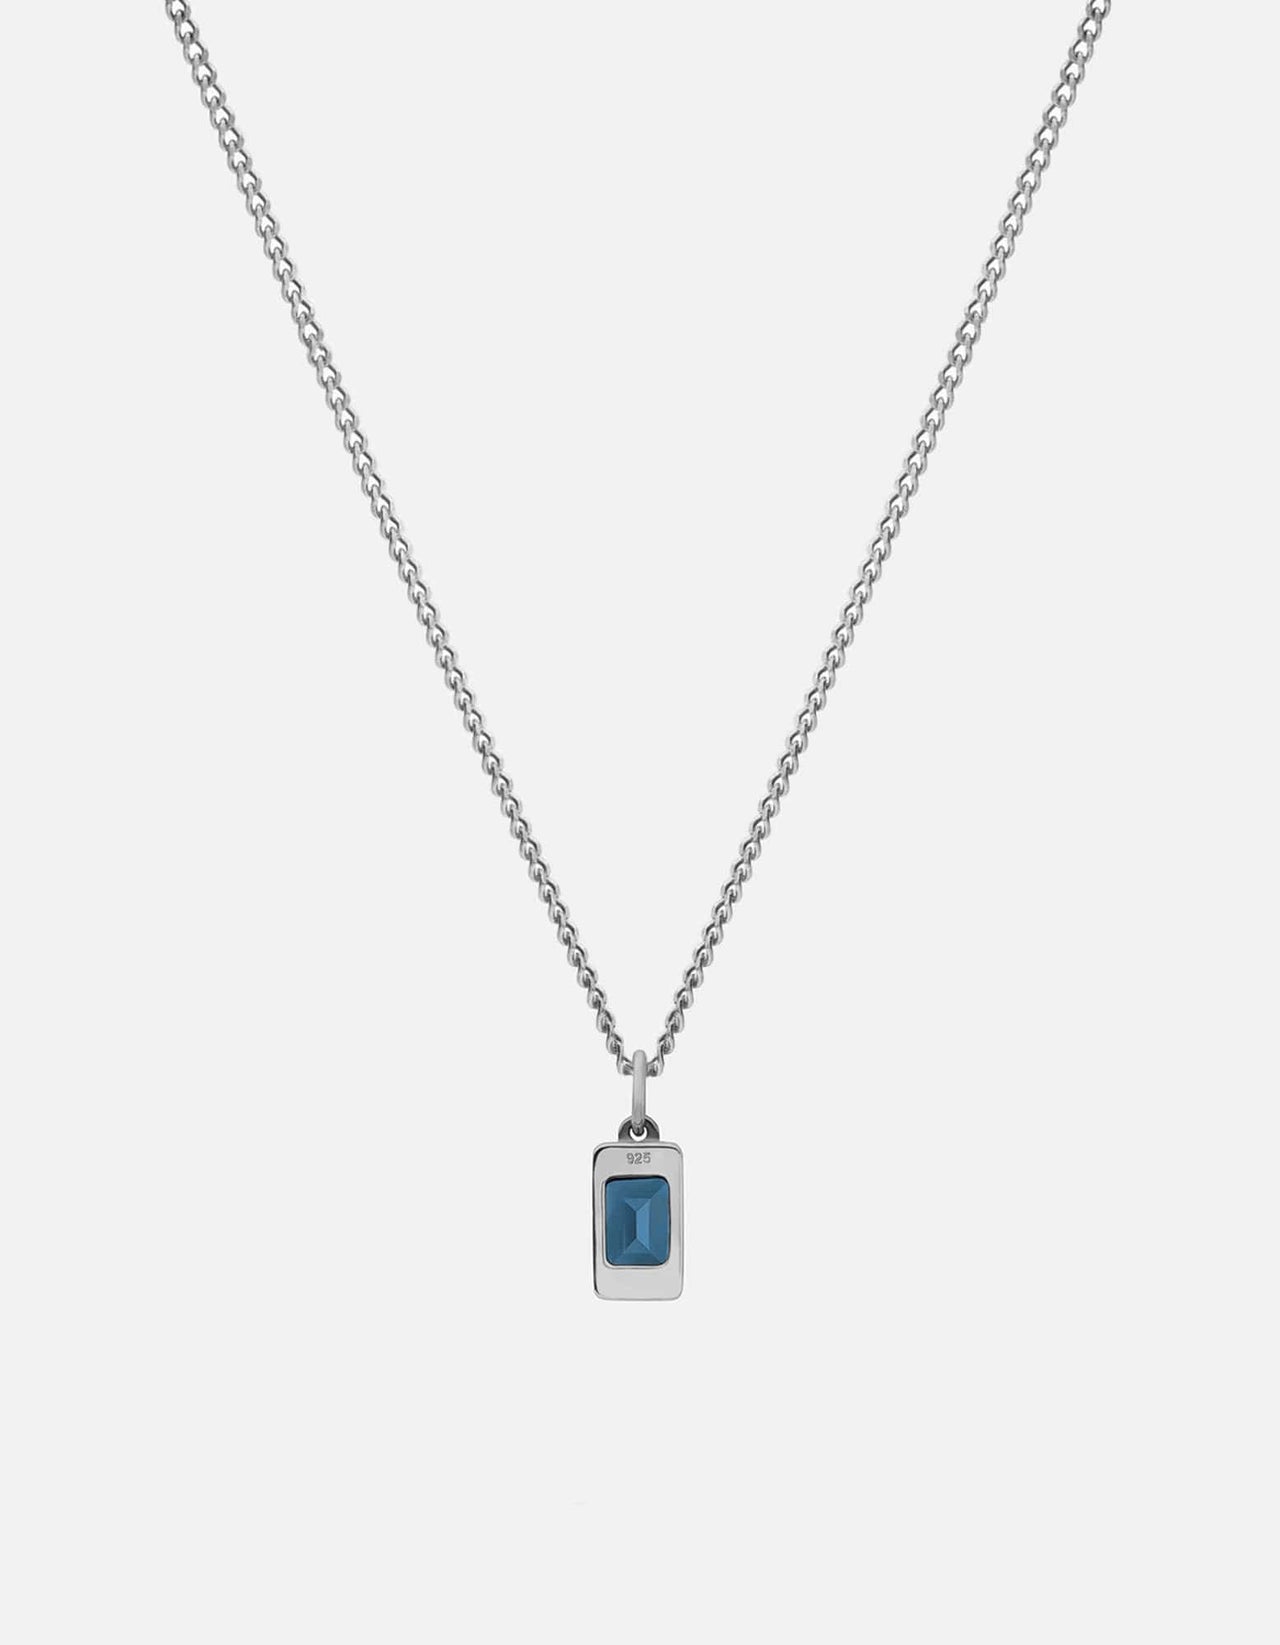 Azure Blue Diamond necklace | MADE WITH 925 SILVER – YellowSnake